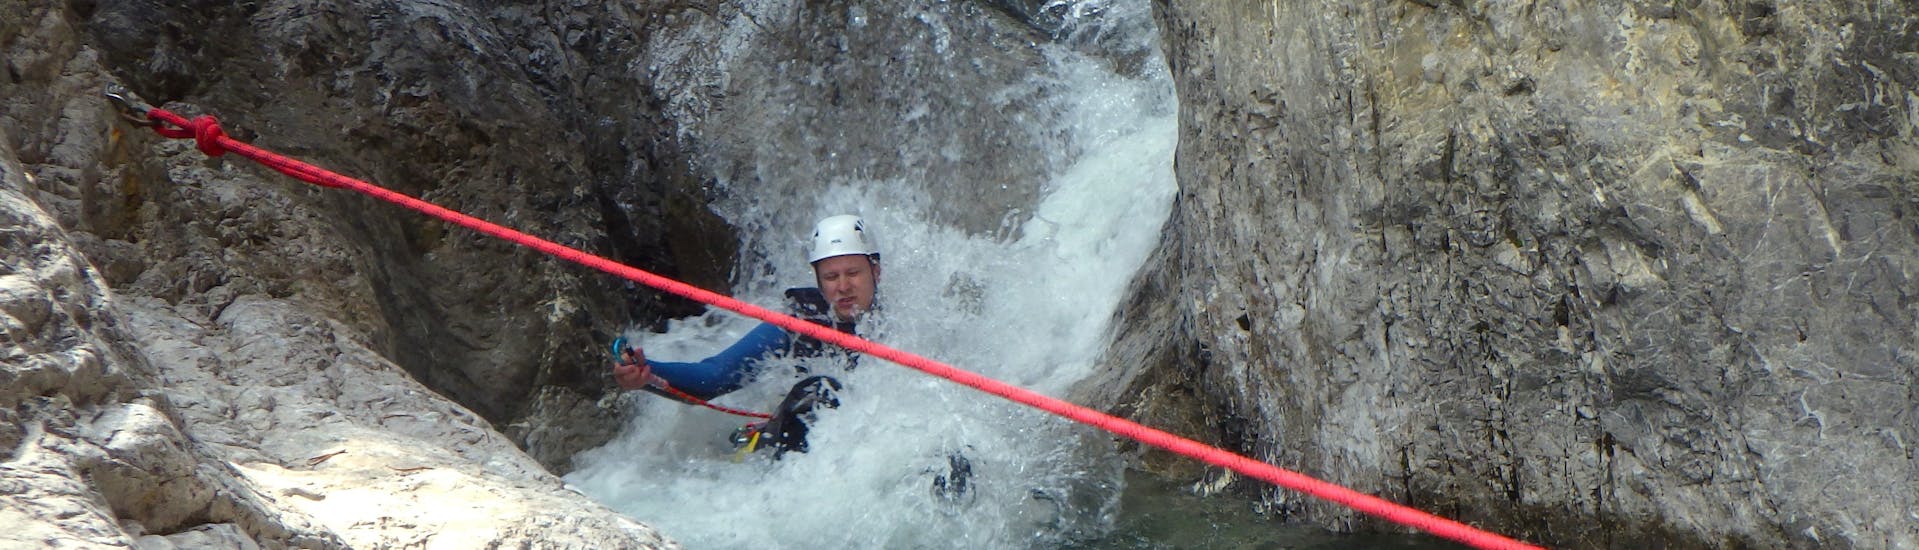 Canyoning in the Wiesbach Canyon in Lechtal for Families.